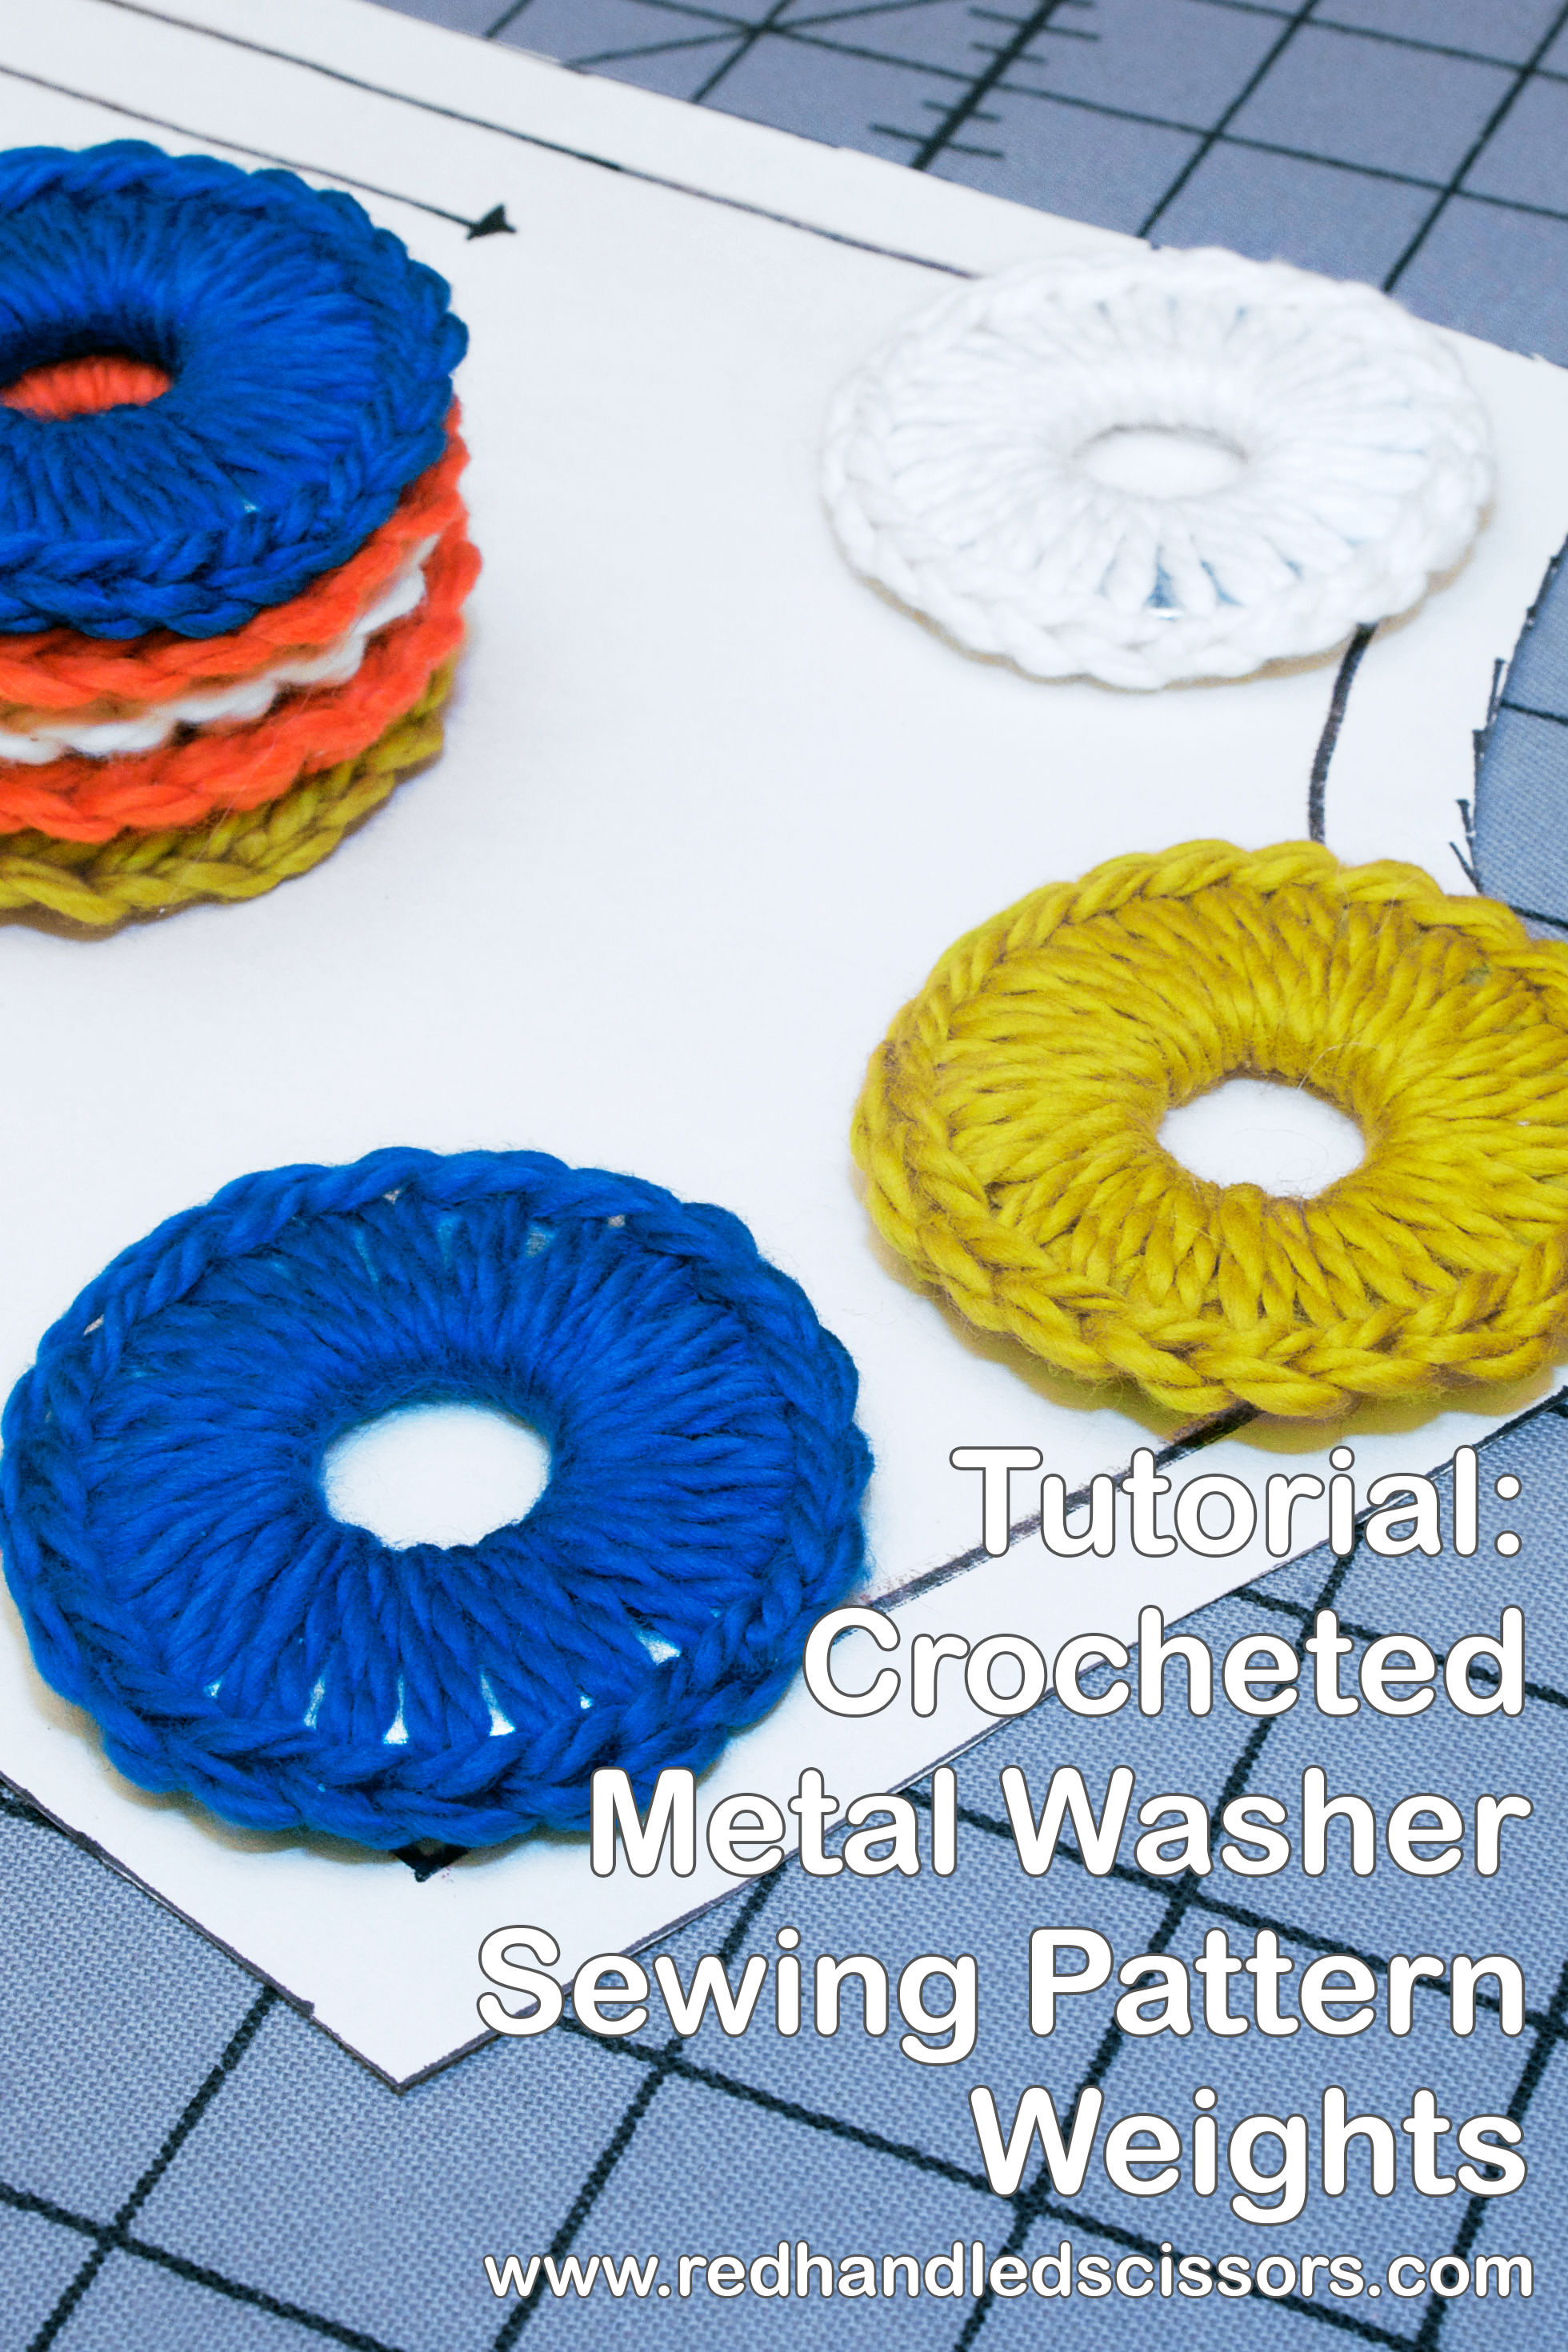 Video Tutorial: Crocheted Metal Washer Pattern Weights